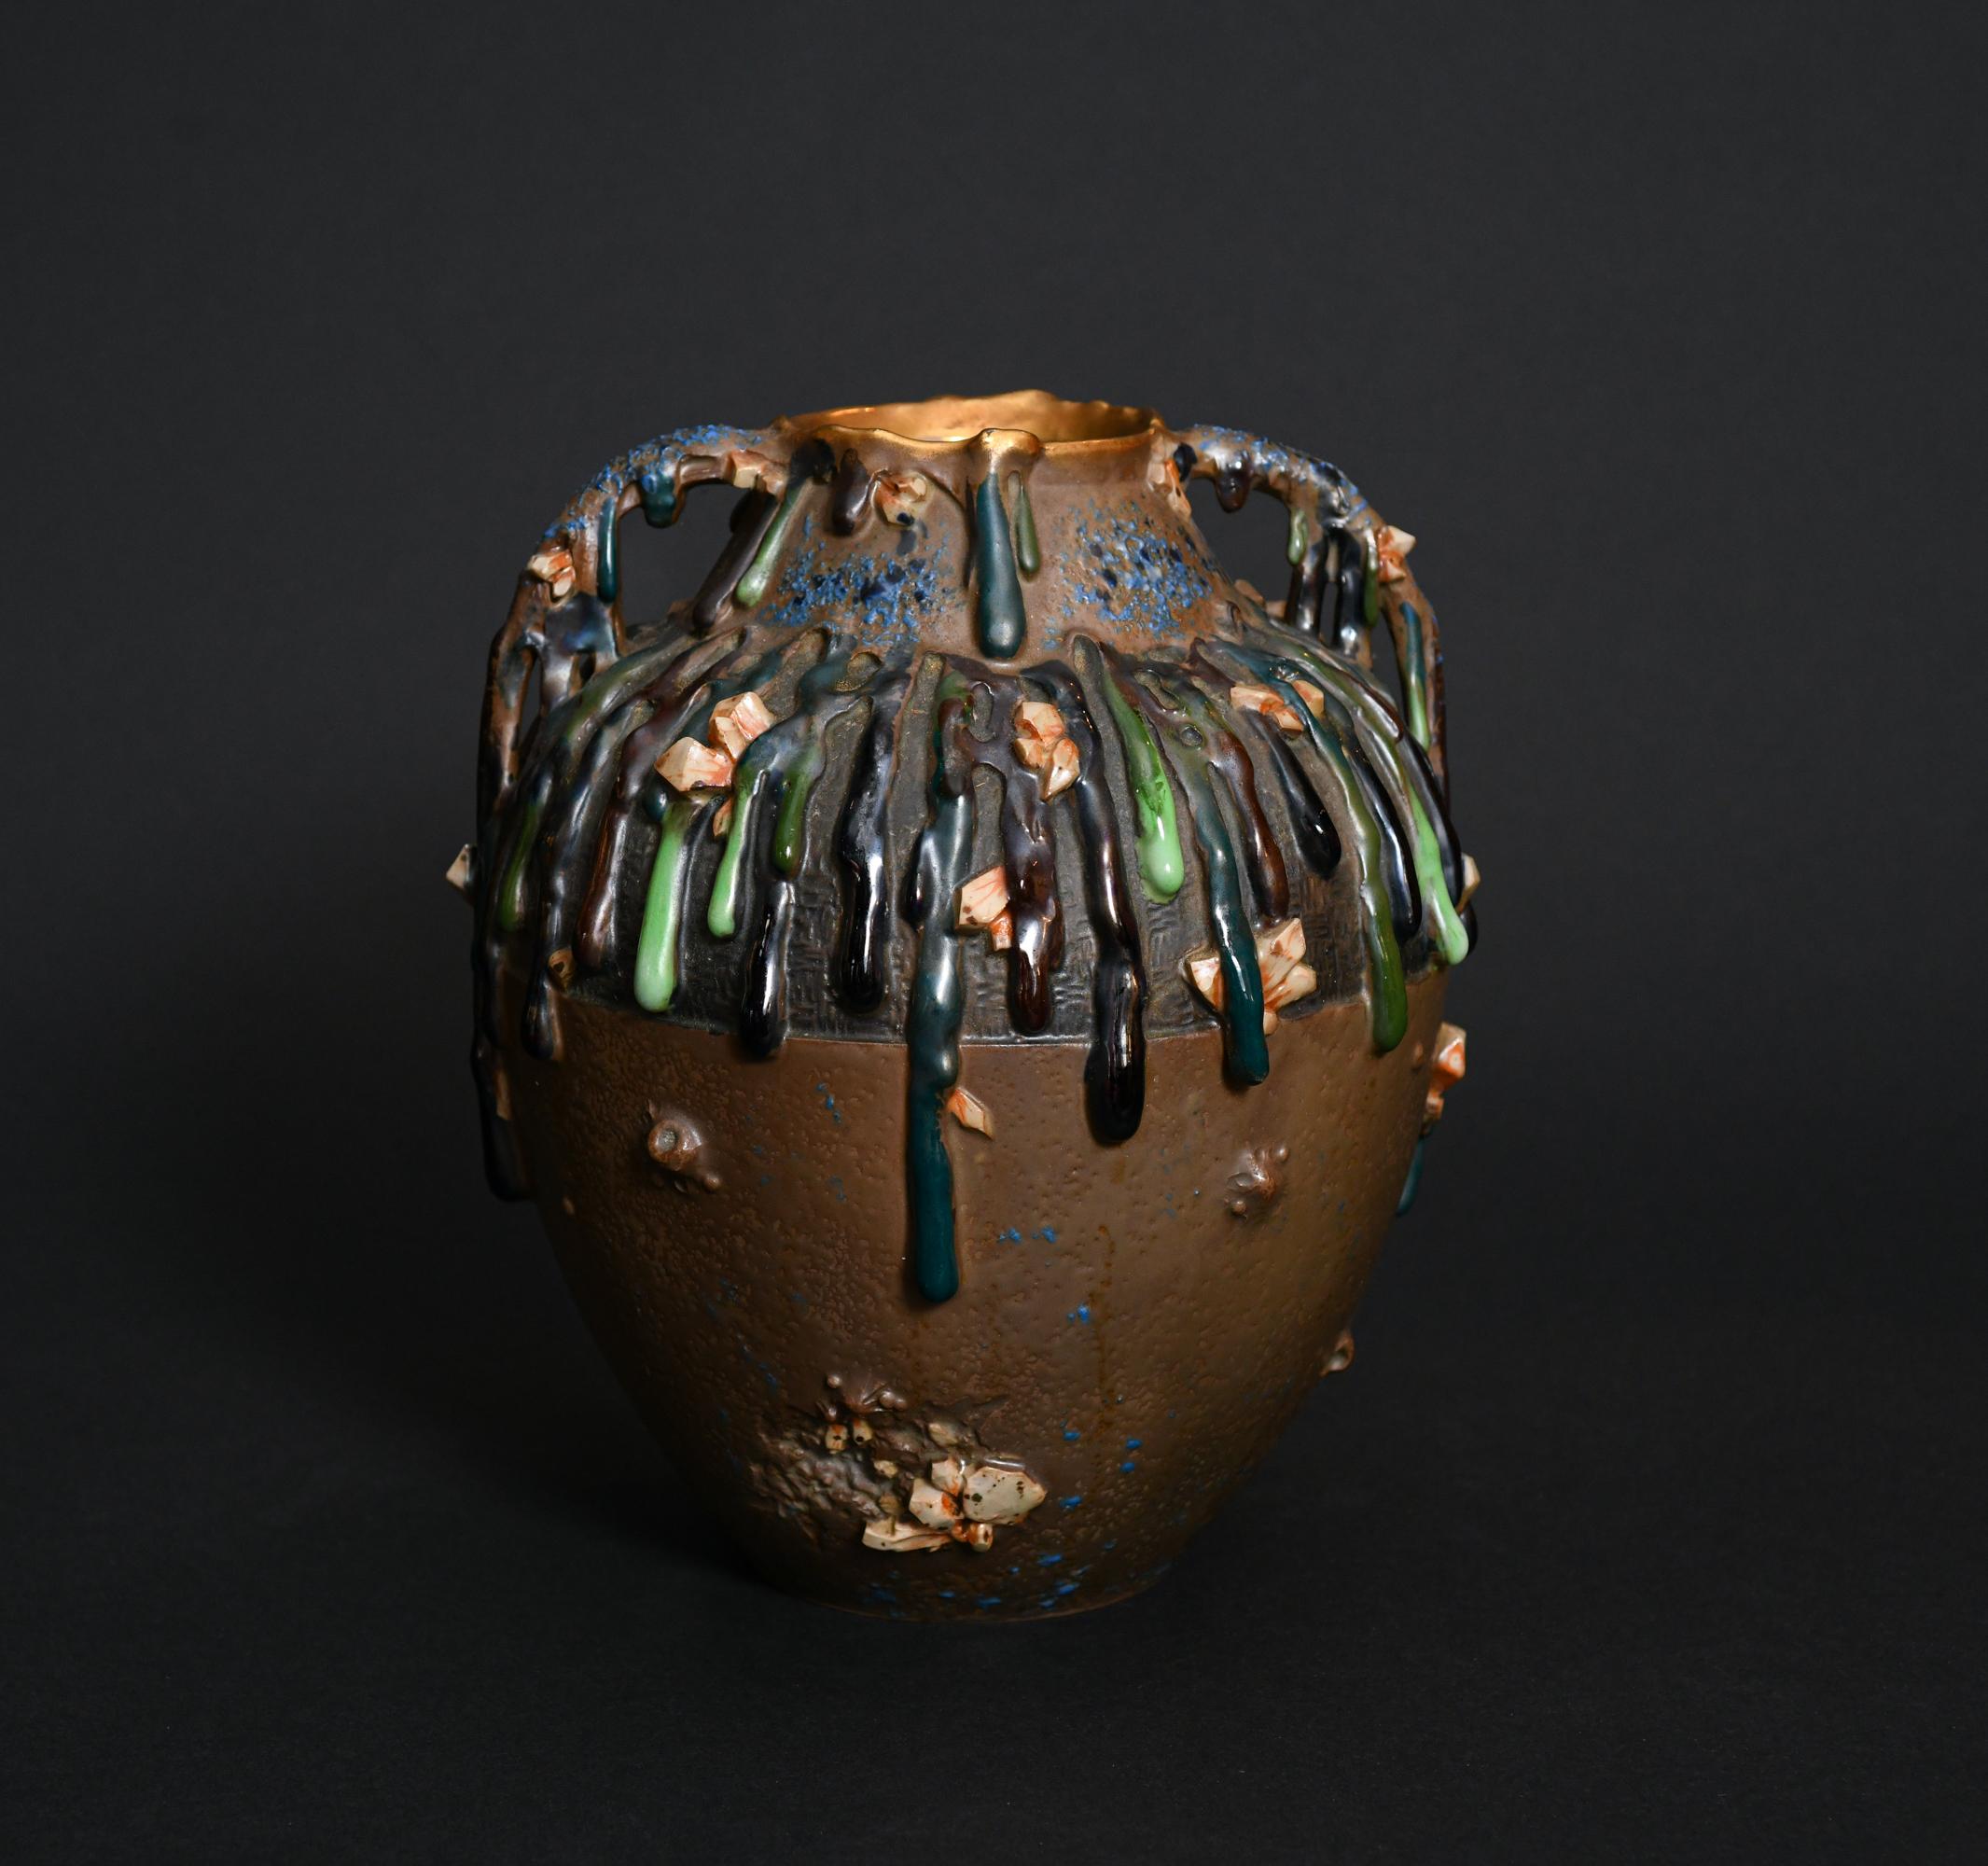 The virtuosic blending of color and texture shows how inventive decoration can triumph over nondescript form. Brightly colored drips of slurry clay cascade like melted wax down the two-handled jug-like body, whose shoulder and lower body exhibit